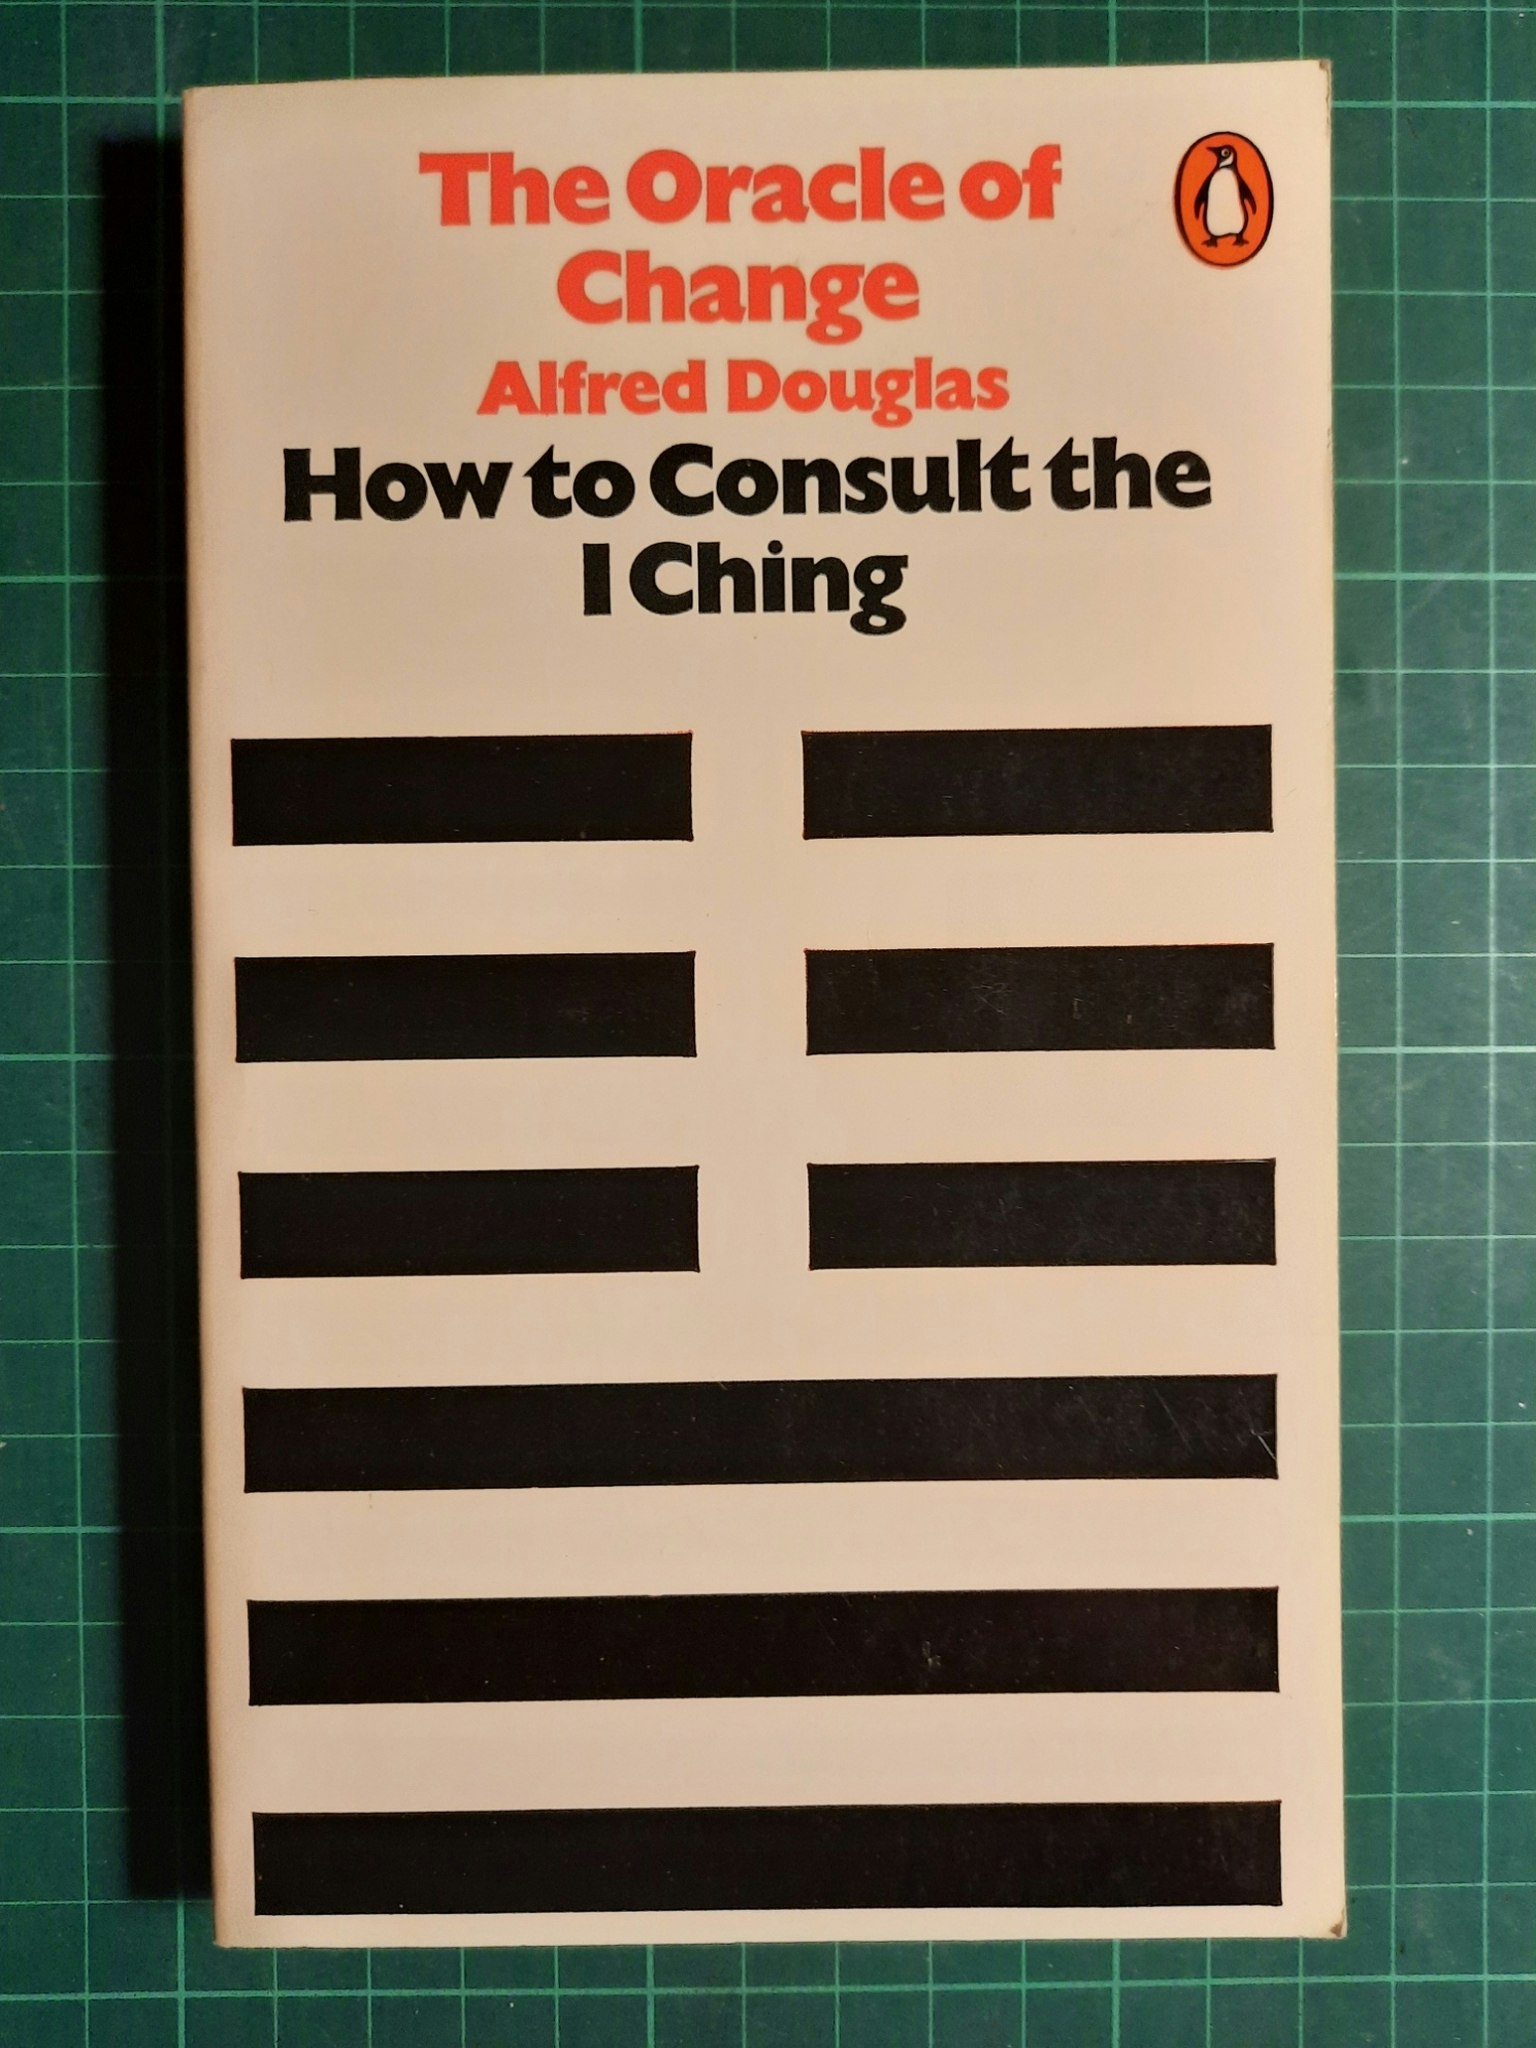 The oracle of change, How to consult the I Ching